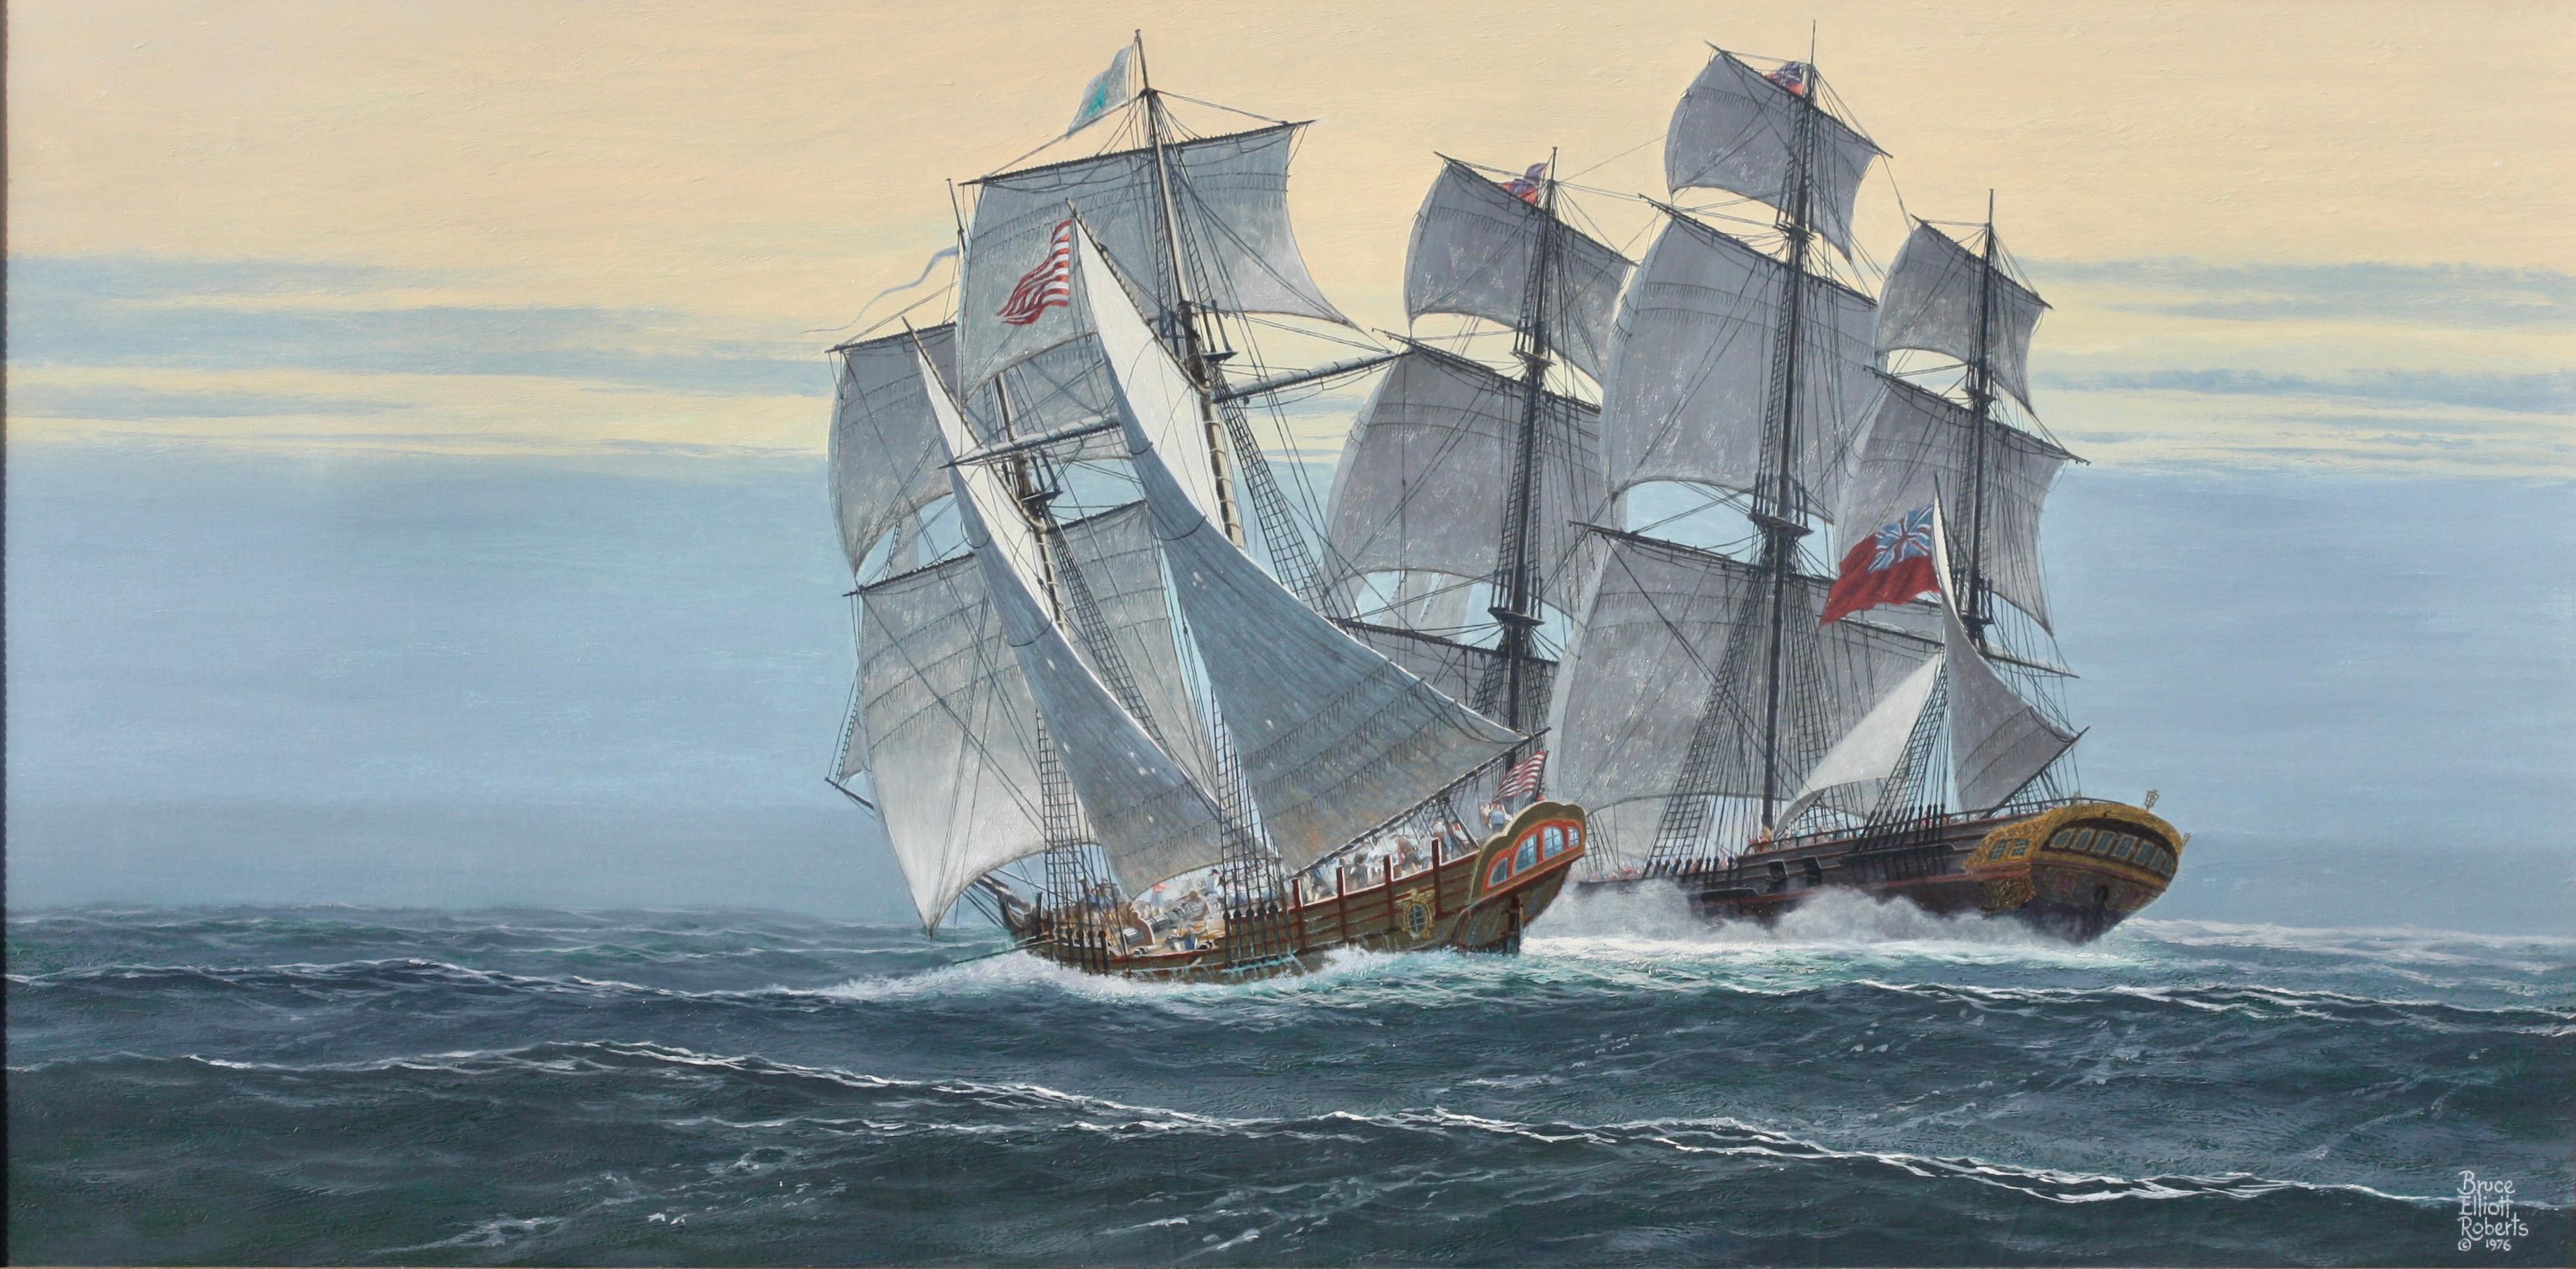 Bruce Elliot Roberts (1910)
'The Capture of a Powdership'
Oil on canvas 
Signed Bruce Elliot Roberts and dated 1976 (lower right) 
signed again and titled (on the reverse) 
Capture of a Powdership/Franklin vs. H.M. Hope/by Bruce Elliot